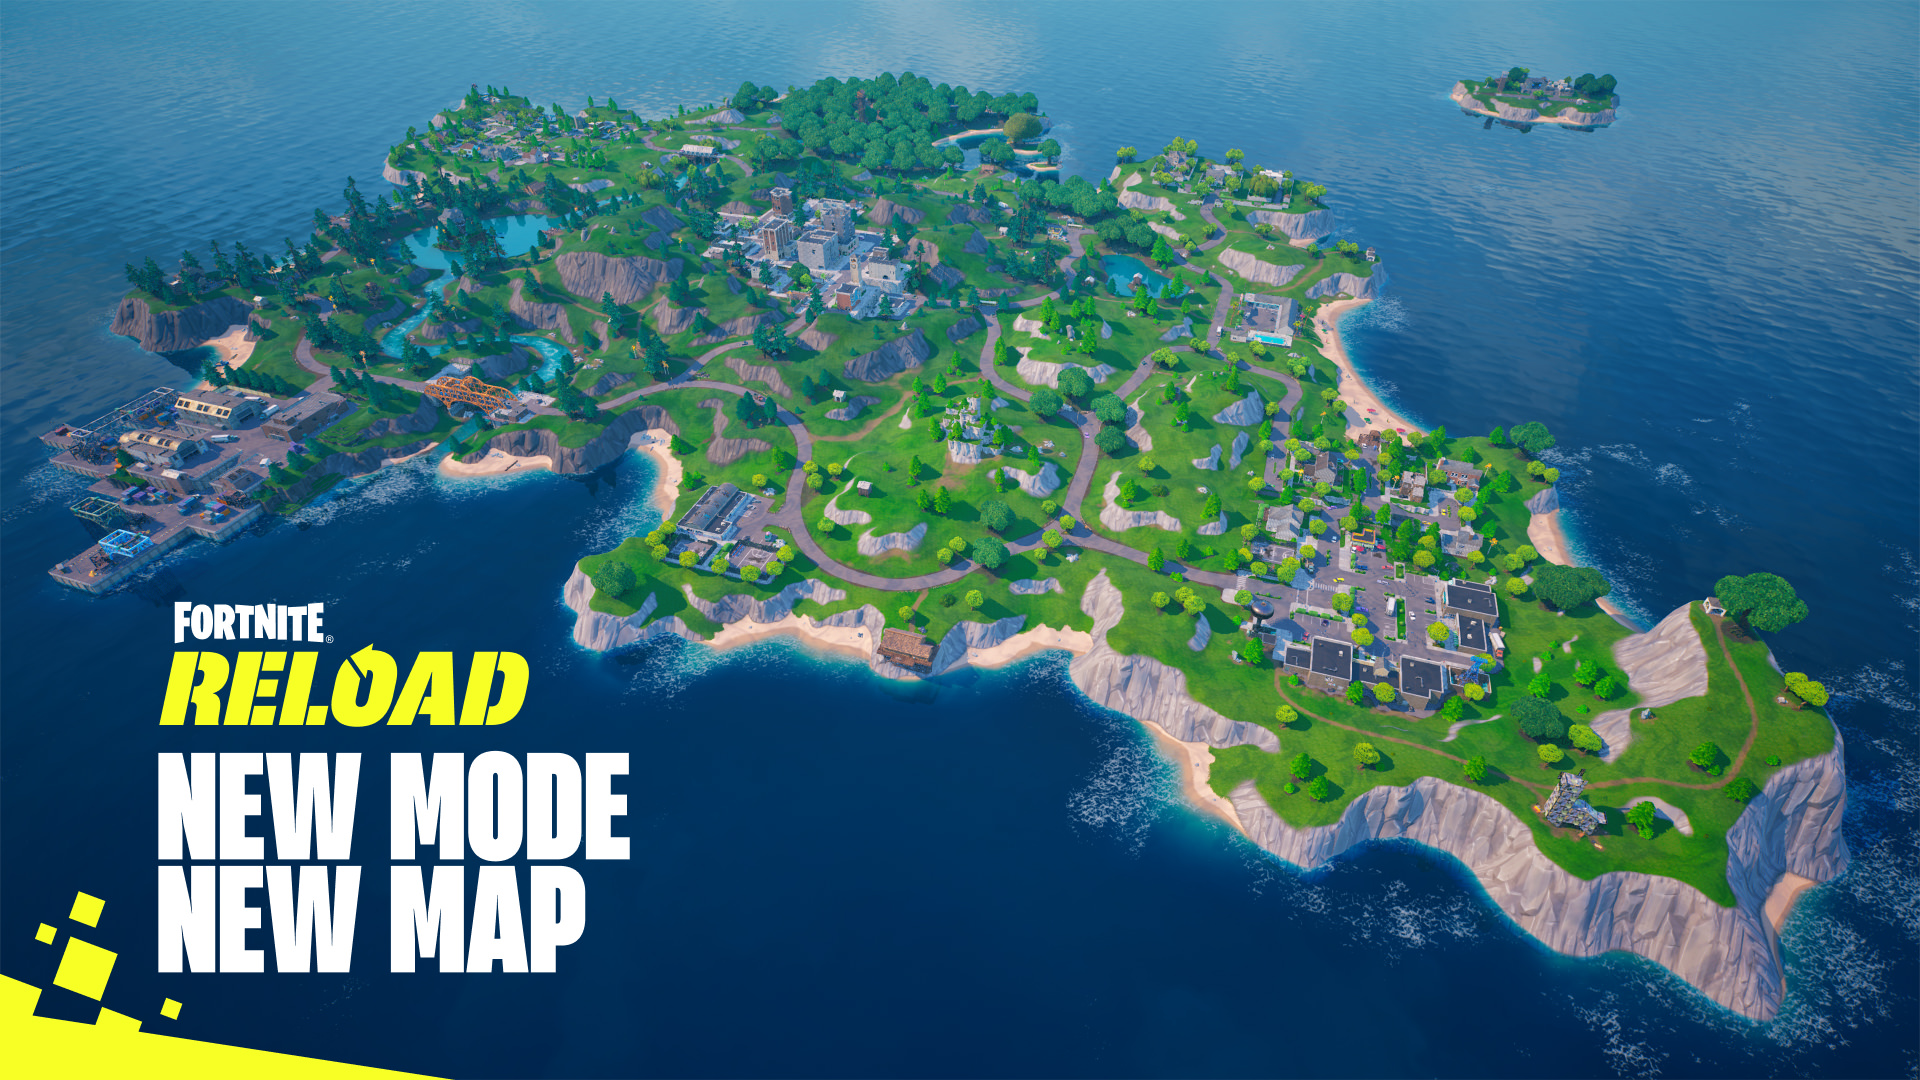 Fortnite Reload features unlimited respawns and a smaller map